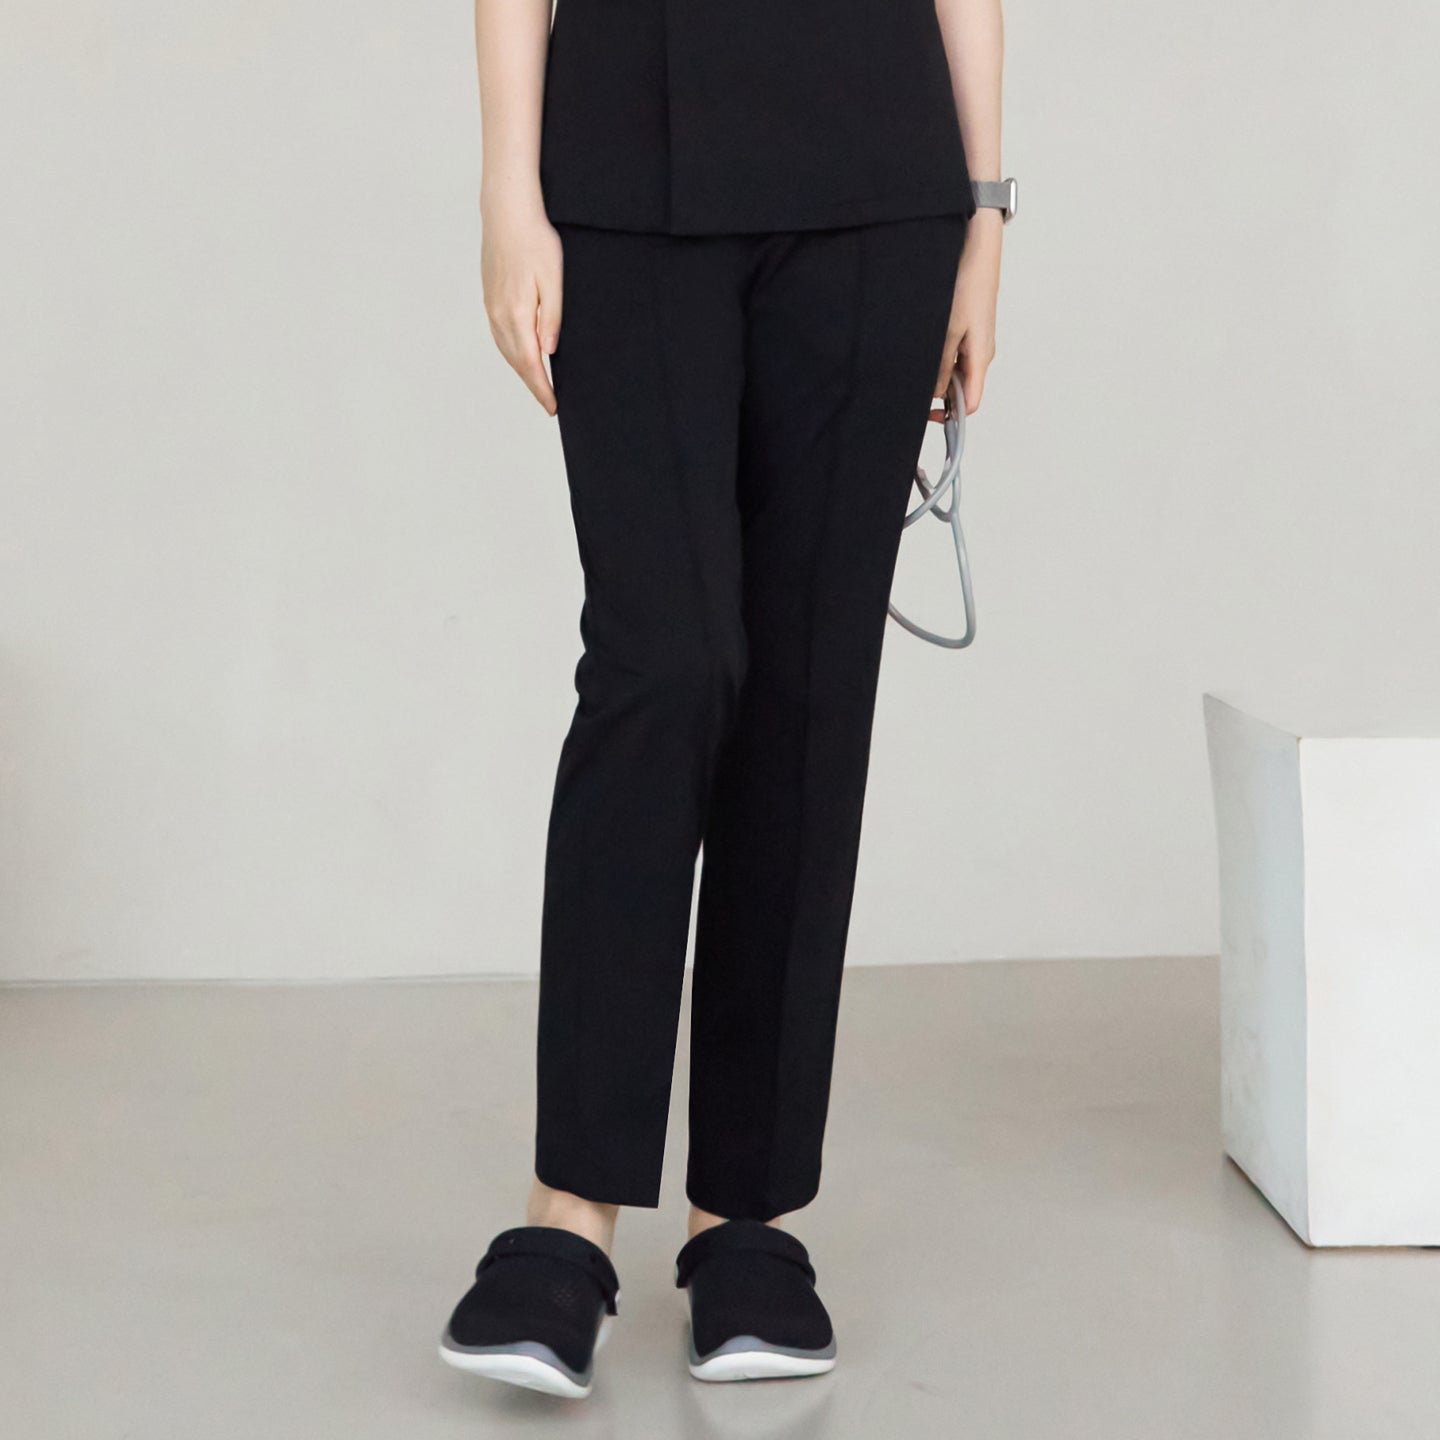 Front view of a woman wearing Eco Black W-Line Banding Scrub Pants with a matching top and black shoes, standing in a relaxed position,Eco Black